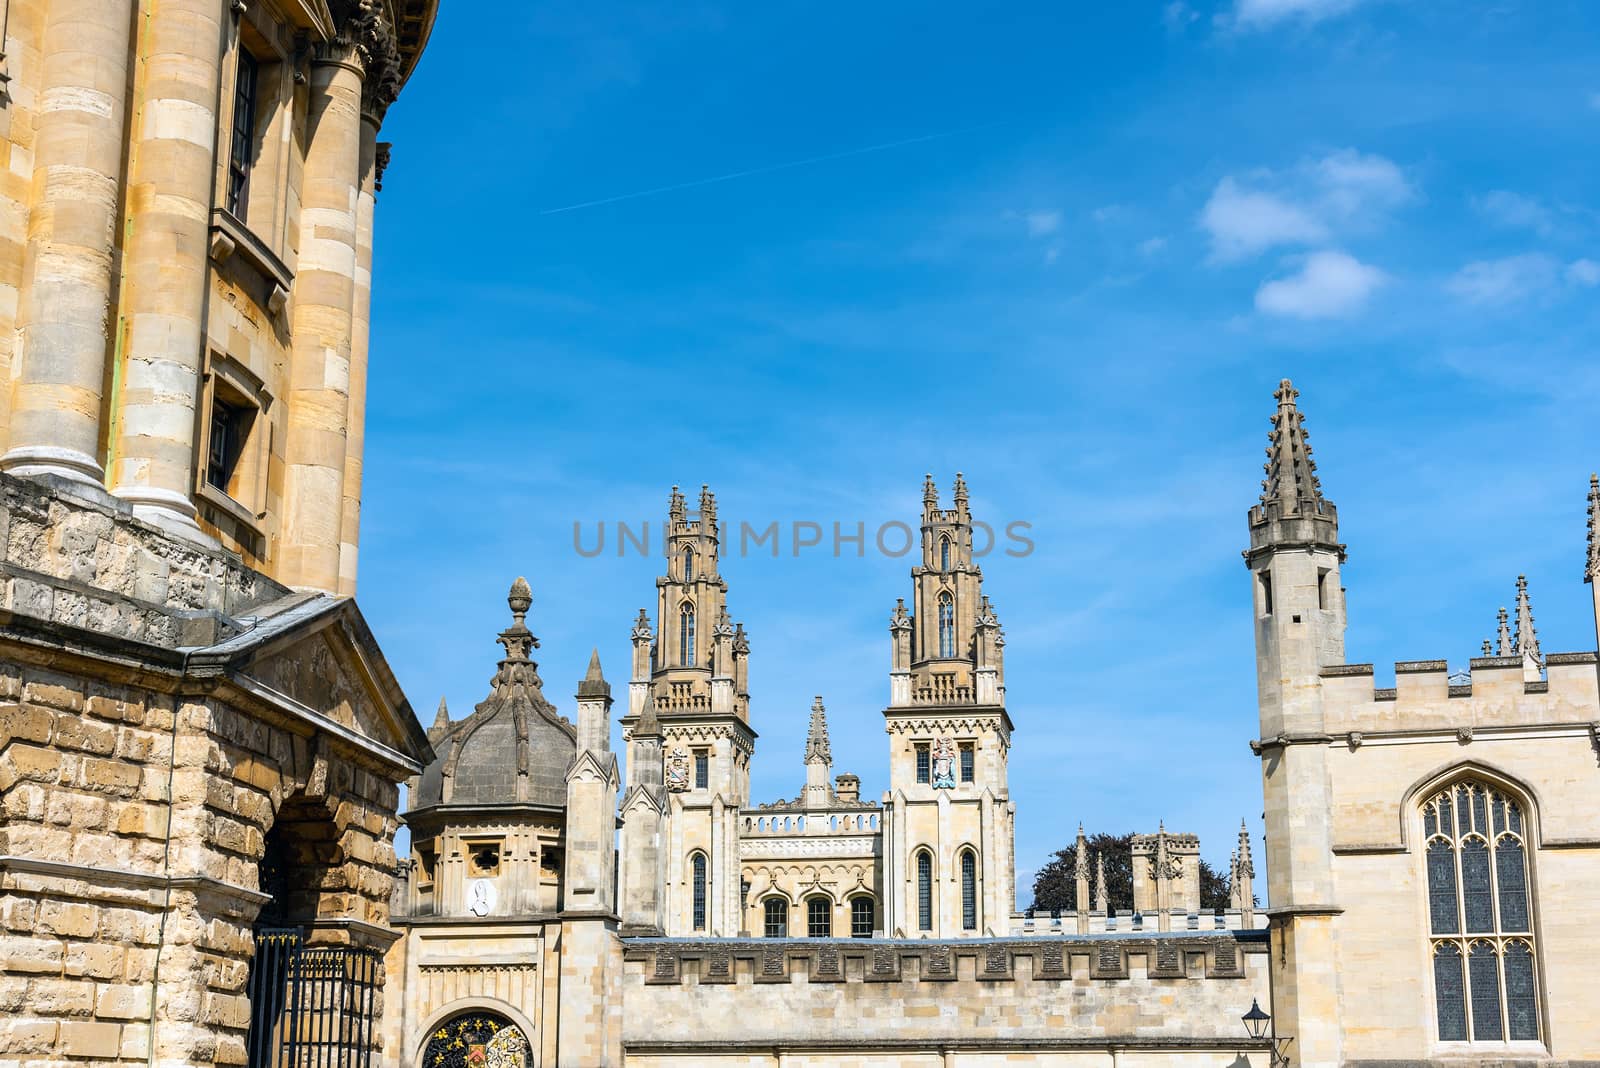 Historic university buildings seen in Oxford, England